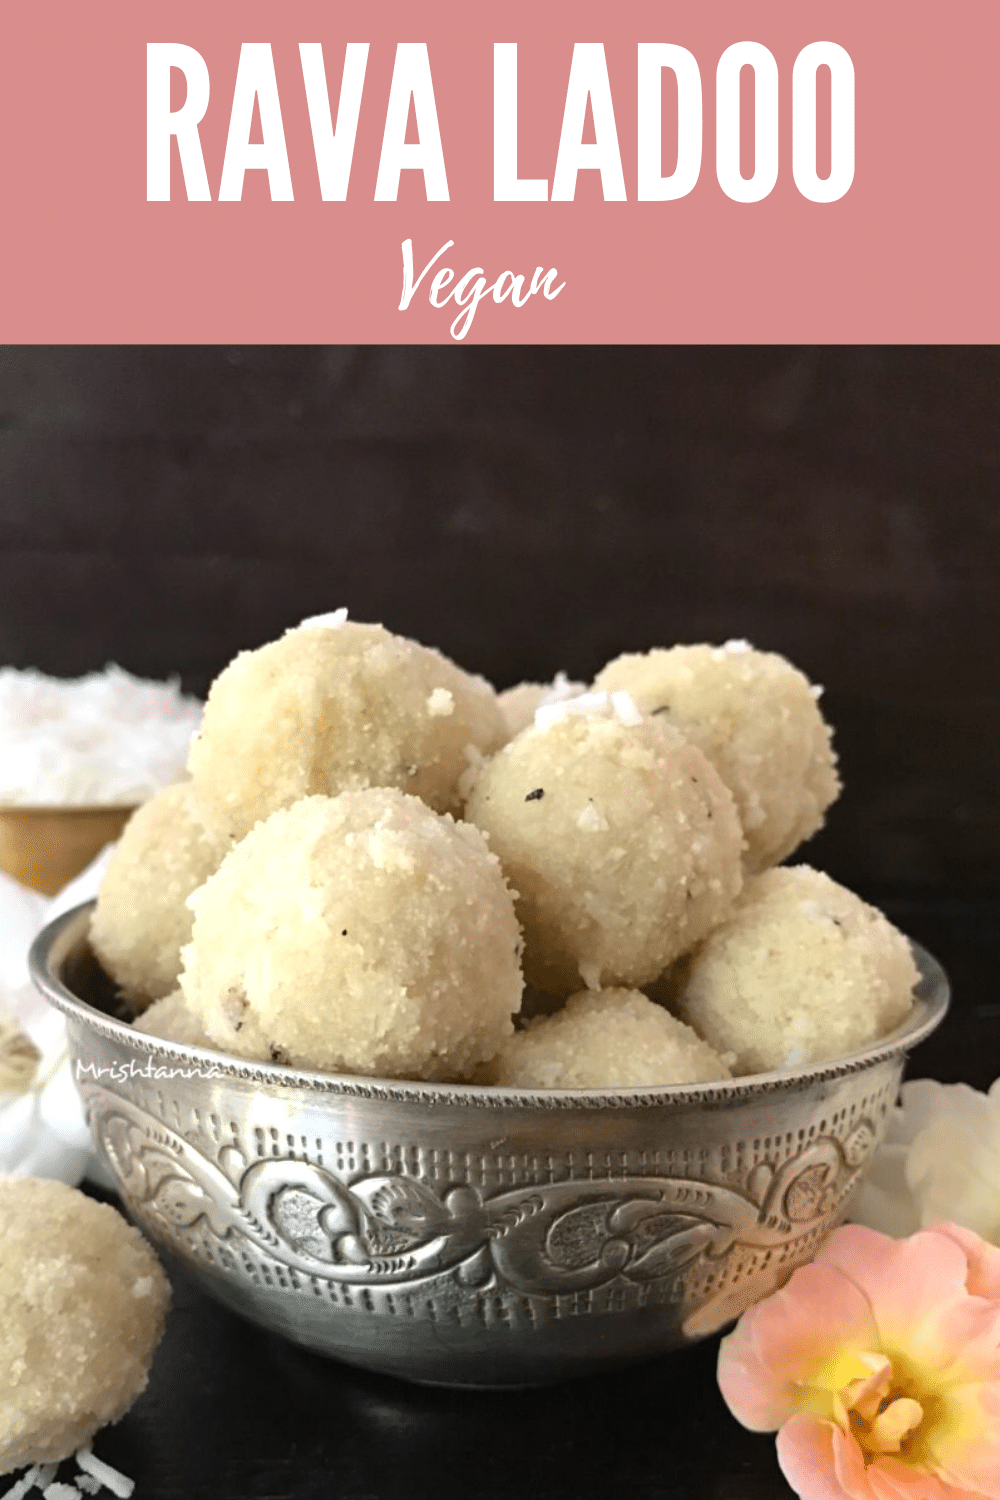 A box filled with different types of food, with Laddu and Coconut